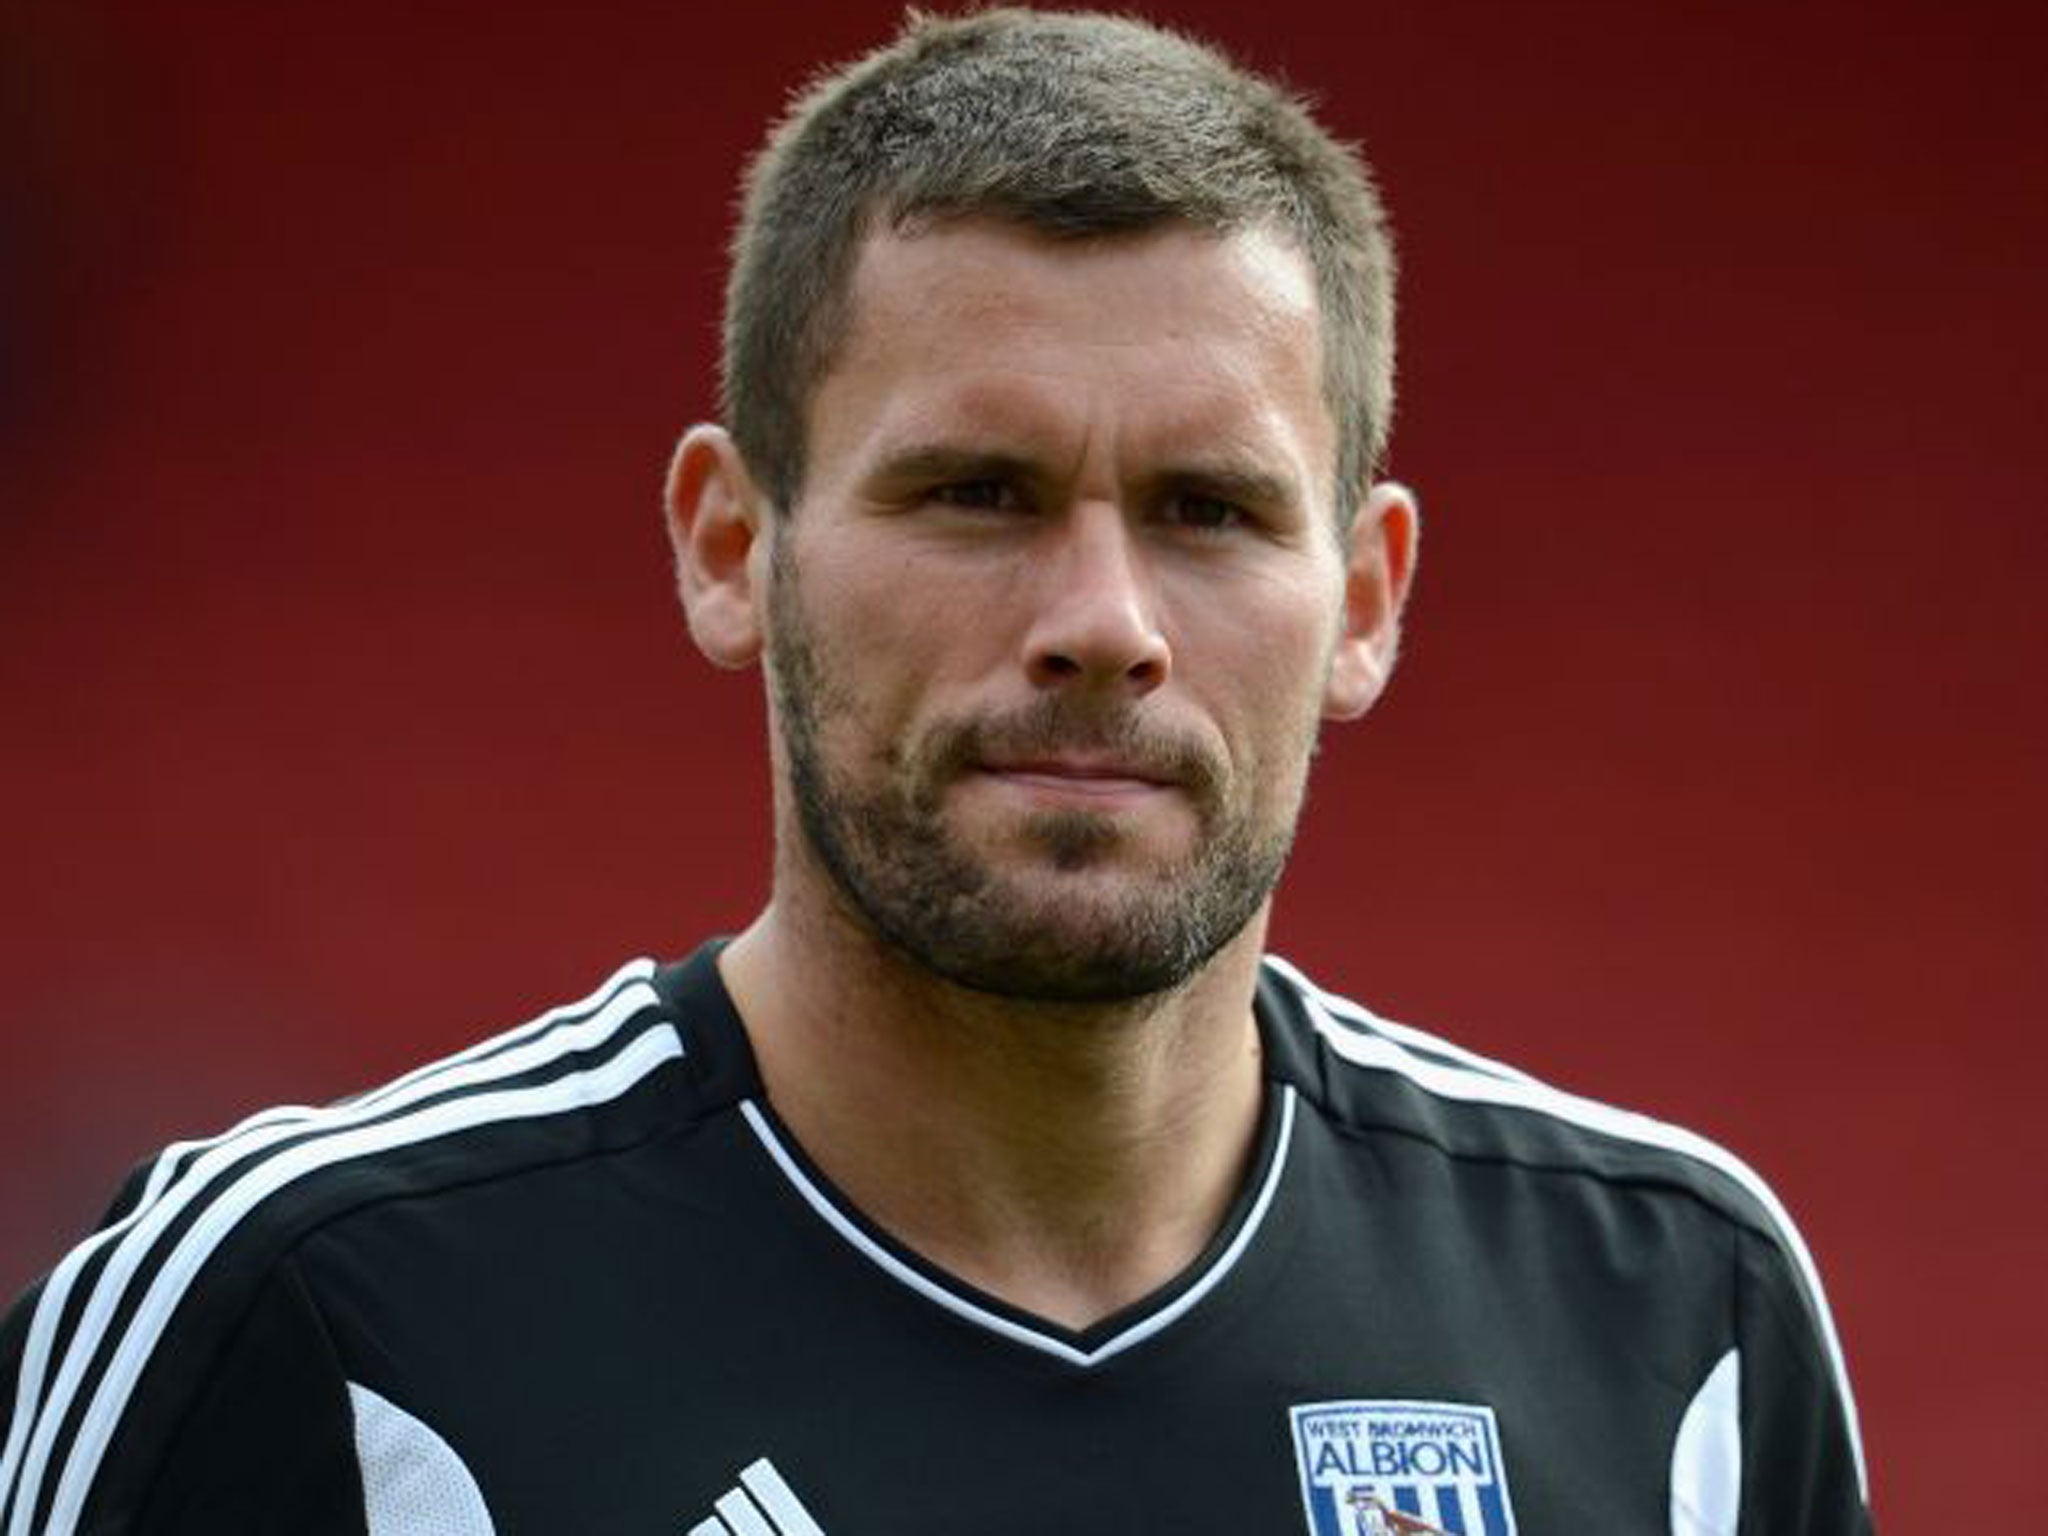 The West Bromwich Albion goalkeeper Ben Foster has been ruled out of tomorrow’s Premier League match